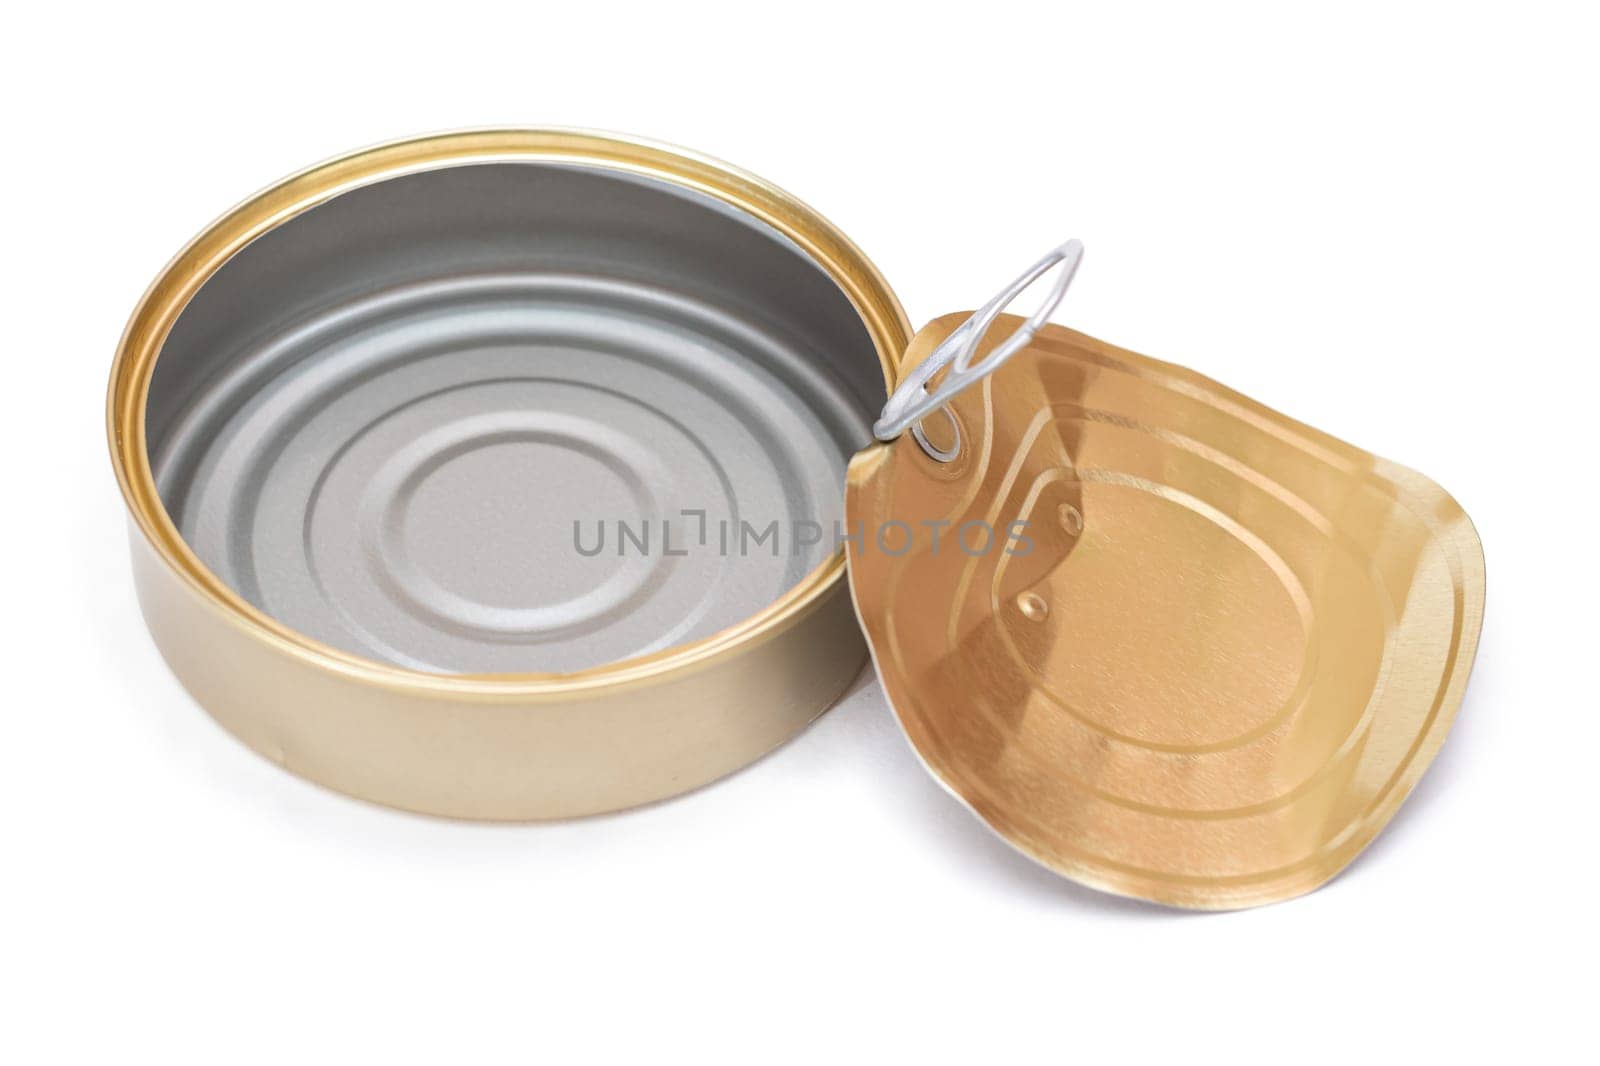 Opened Empty Tin Can With Broken Cover Isolated on White Background by InfinitumProdux